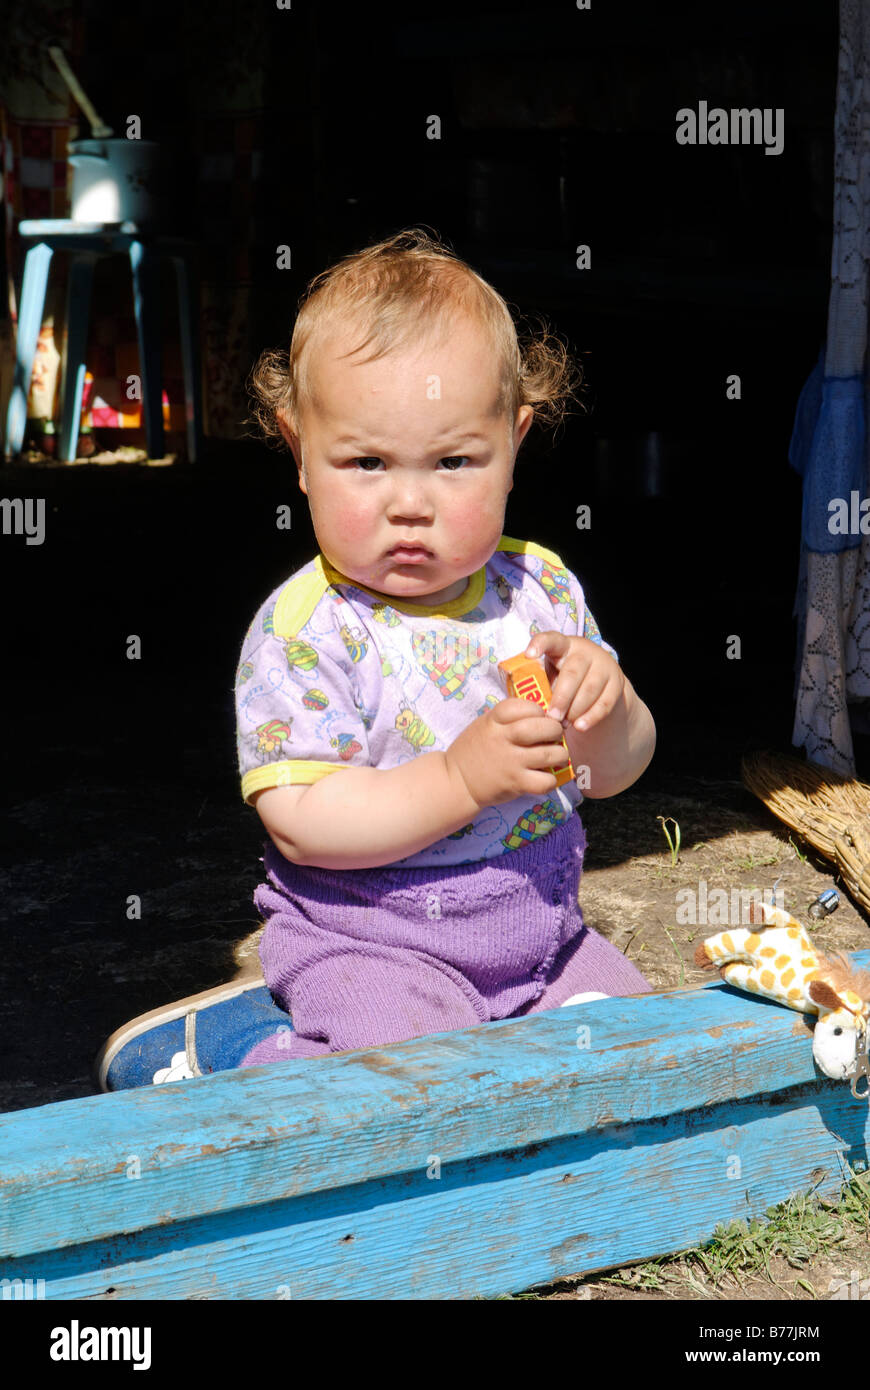 Baby, toddler sitting in the entrance of a yurt, Ger, Altai, Russia, Siberia, Asia Stock Photo